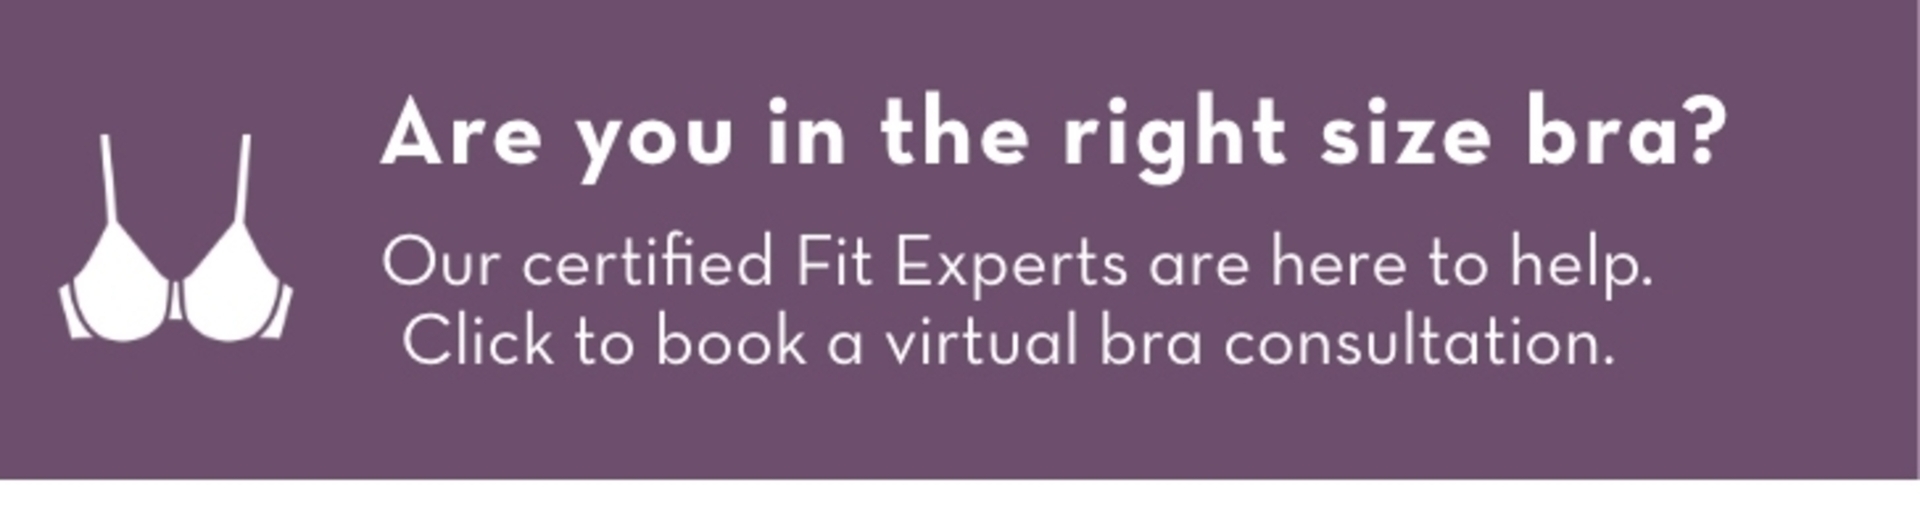 Are you in the right size bra? Our certified Fit Experts are here to help. Click to book a virtual bra consultation.